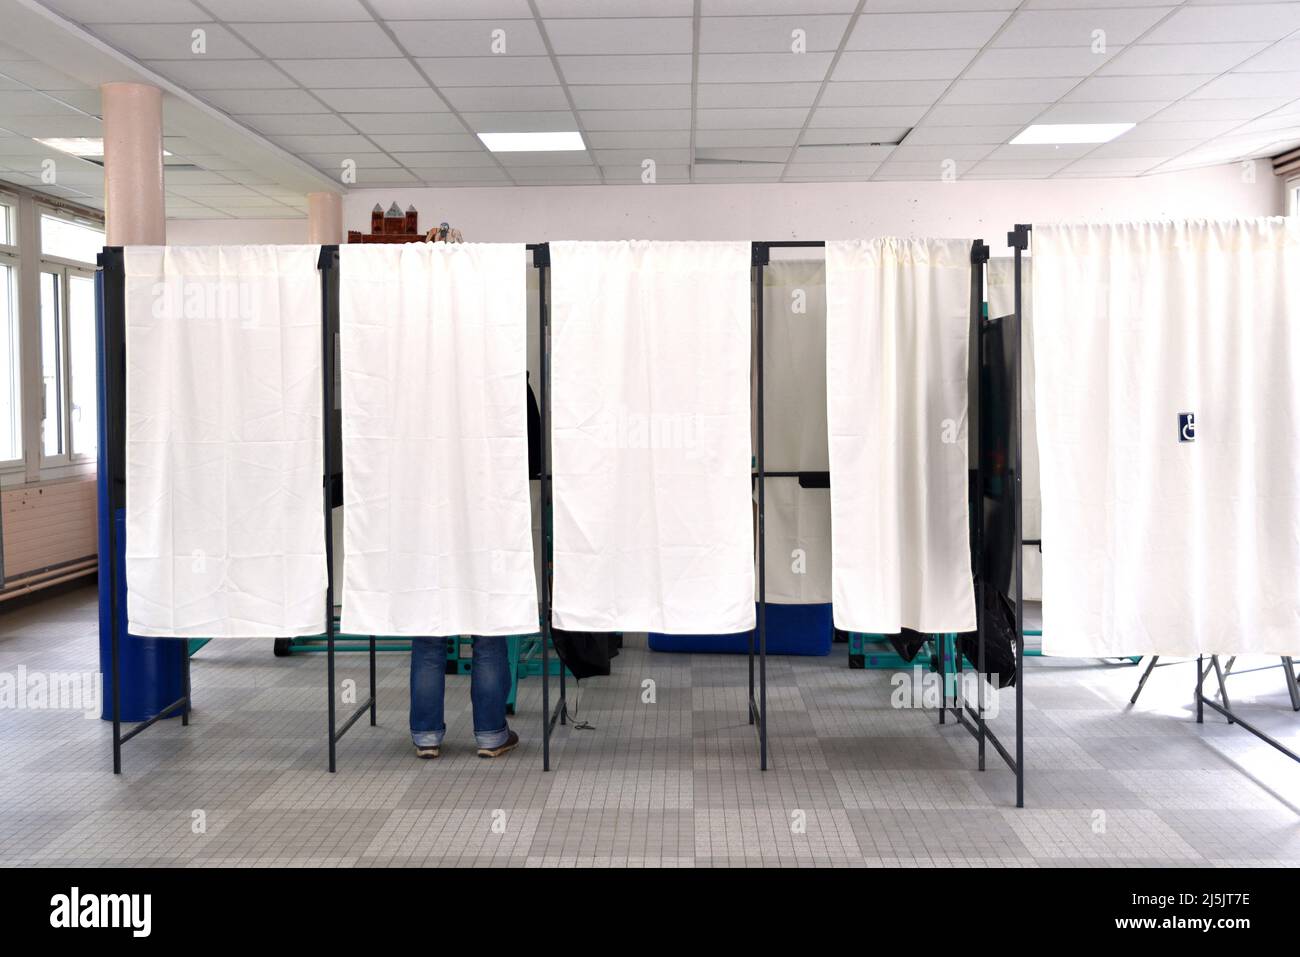 Second round of the French presidential election in Saint-Gratien, France, on April 24, 2022. In the avenue leading to the school housing the voting booths, the posters of the two candidates are torn down. Photo by Pierrick Villette/aBACAPRESS.COM Stock Photo